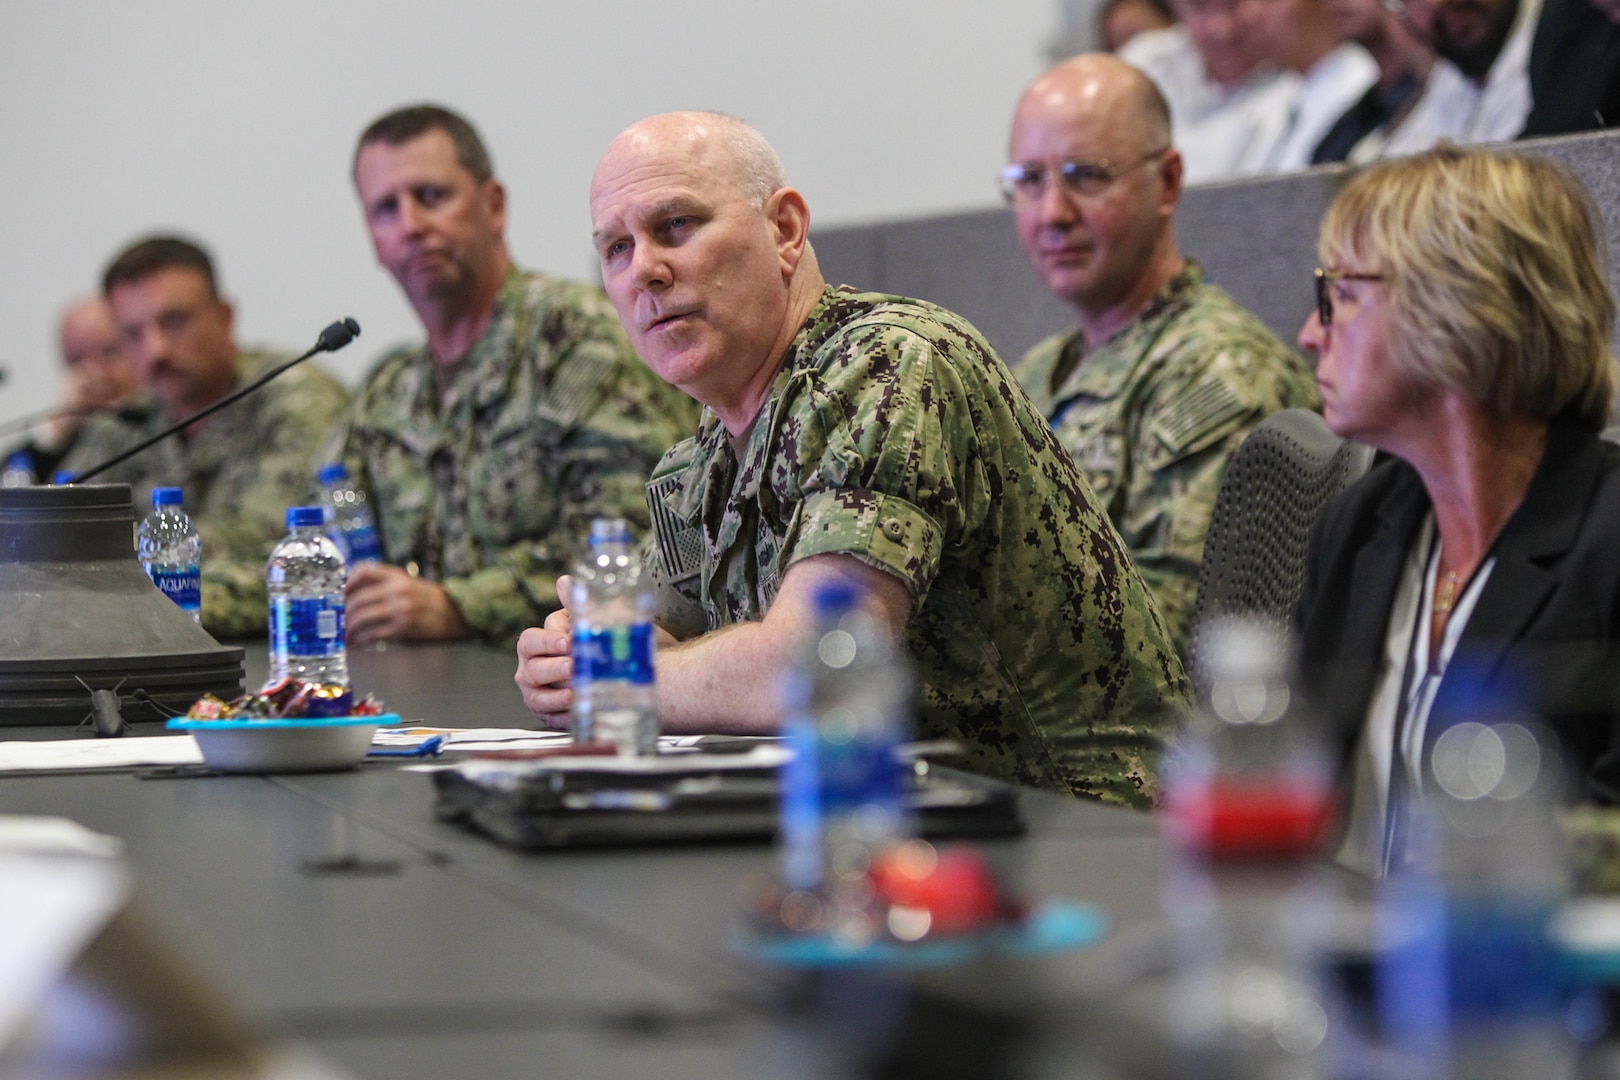 Adm. Christopher Grady, U.S. Fleet Forces Commander, asks a question during a visit at Naval Surface Warfare Center, Corona Division (NSWC Corona).